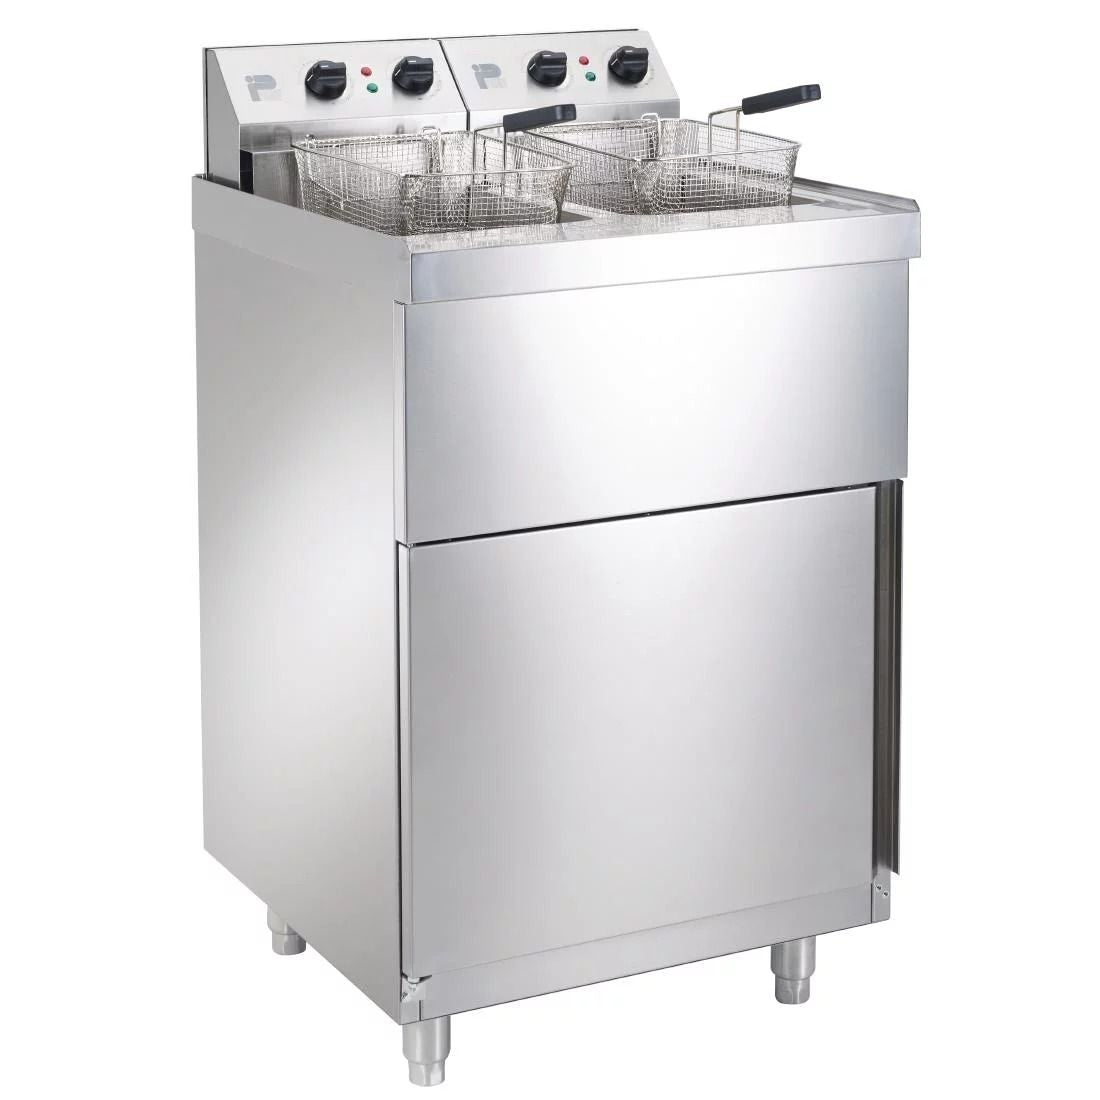 Parry Twin Tank Twin Basket Free Standing Electric Fryer NPDPF6 - GM704 Freestanding Electric Fryers Parry   